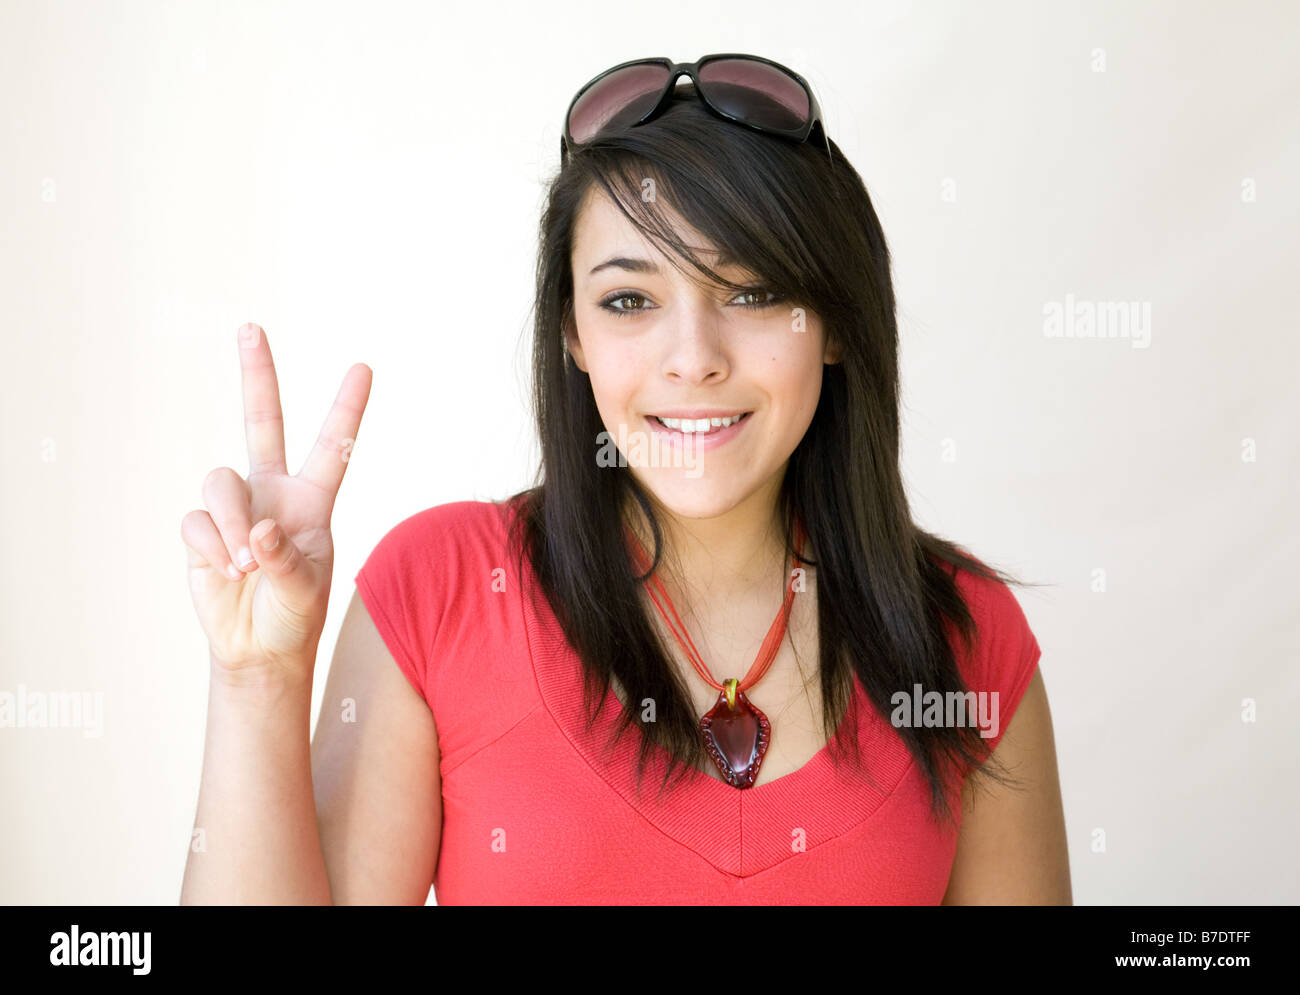 A Young Girl With Sunglasses On Her Head Giving A V Sign Stock P